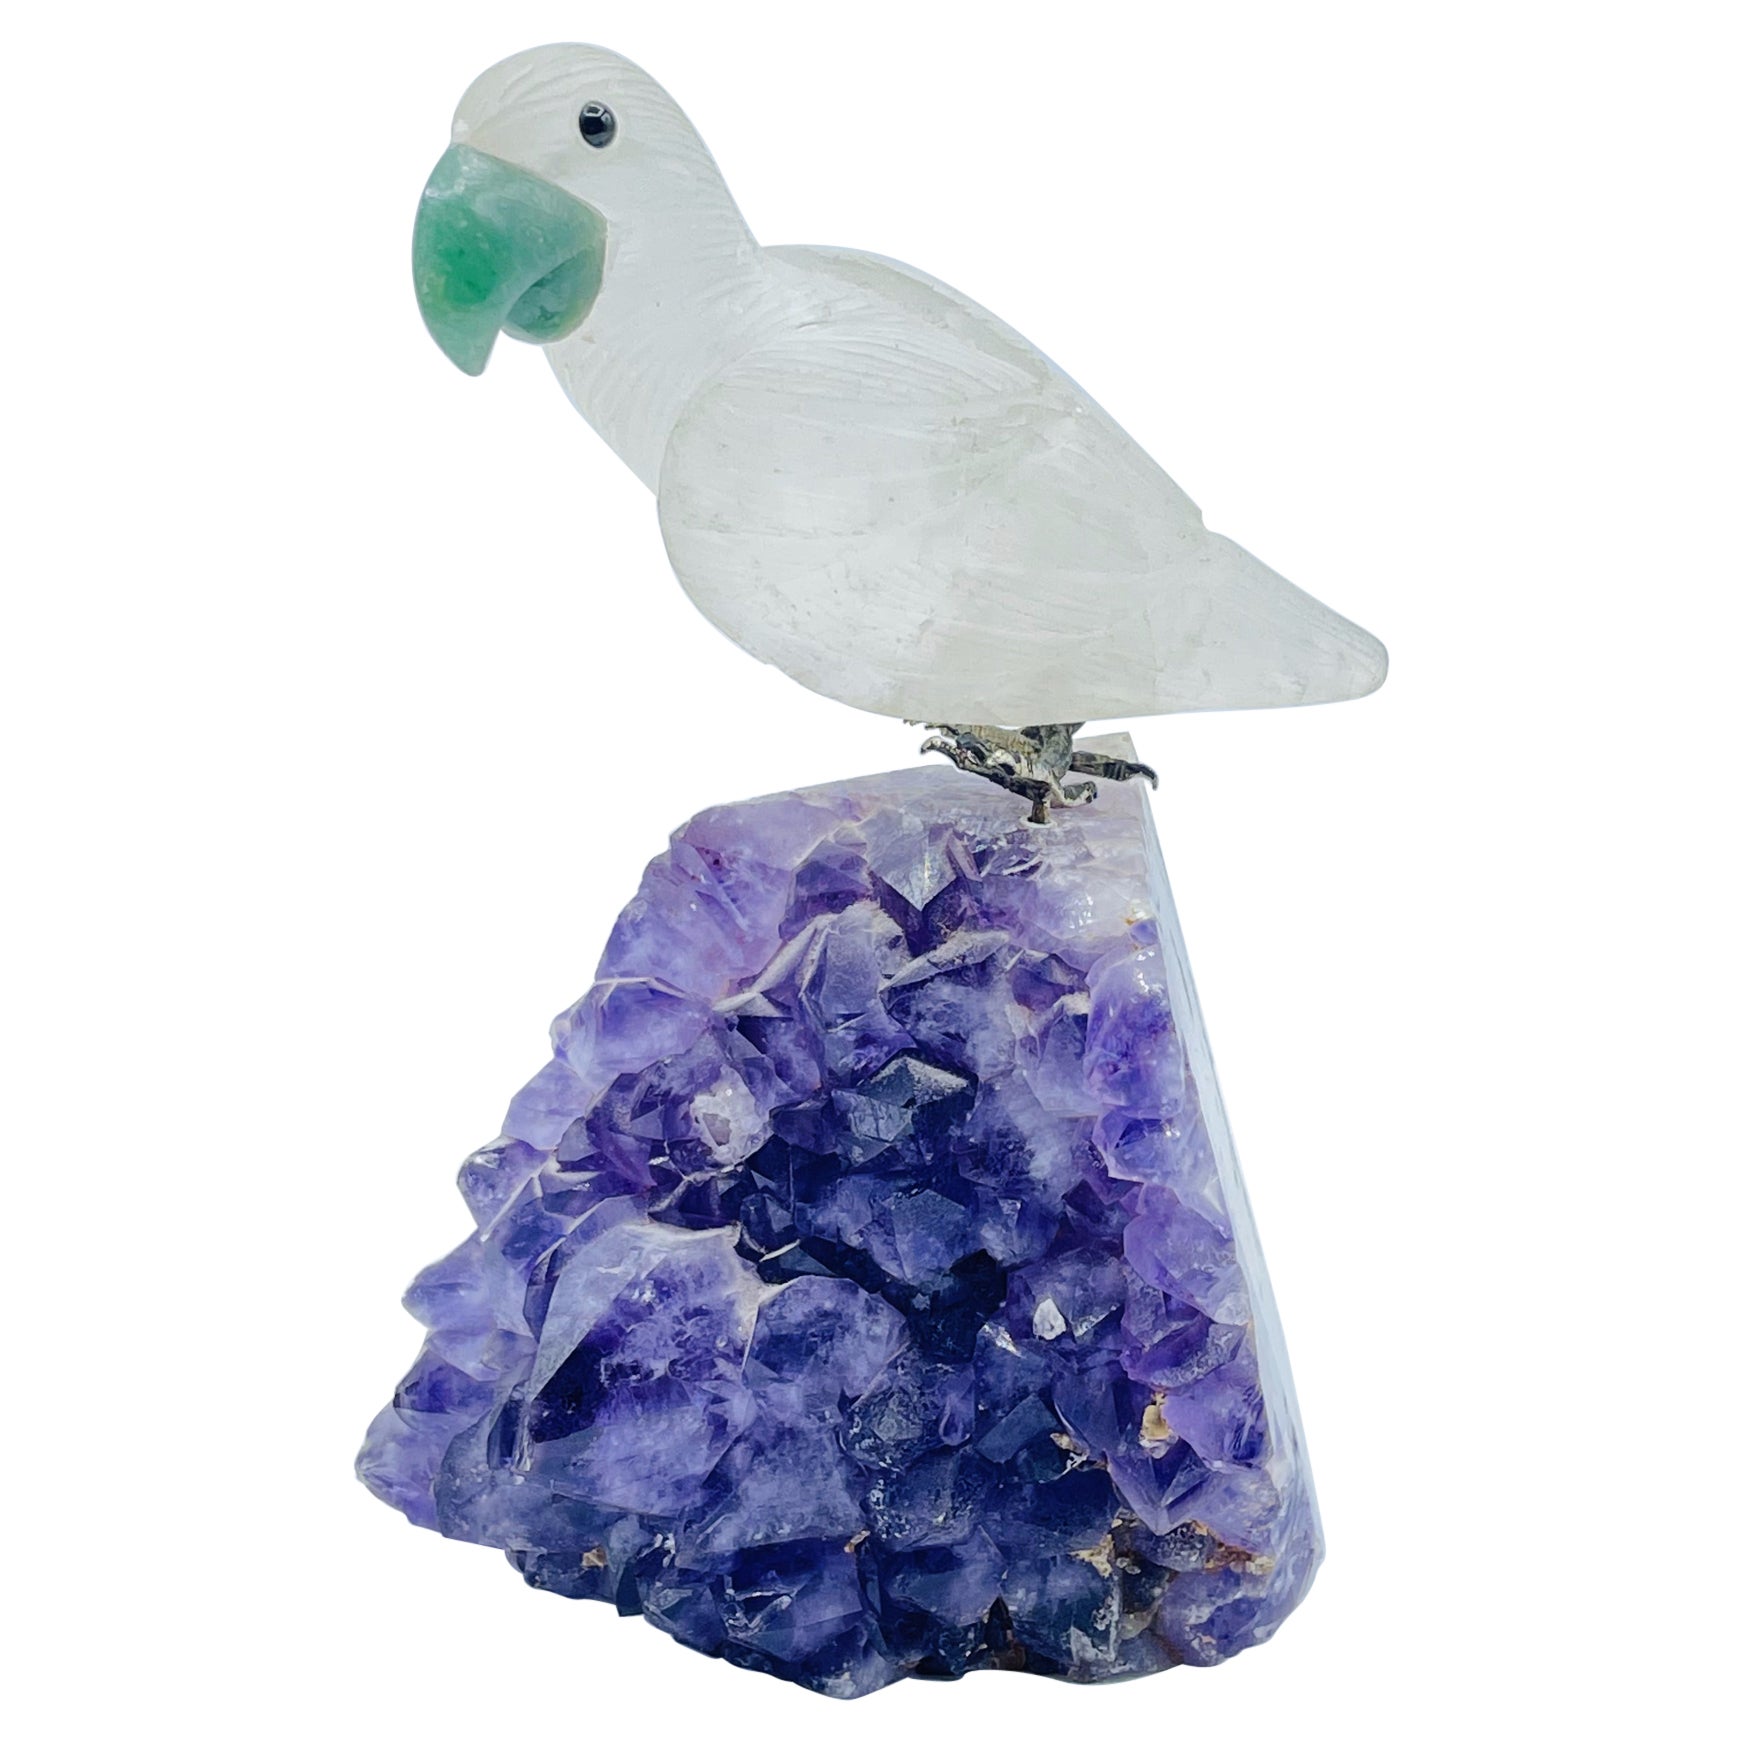 Rock Crystal and Amethyst Geode Sculpture of a Carved Parrot Bird